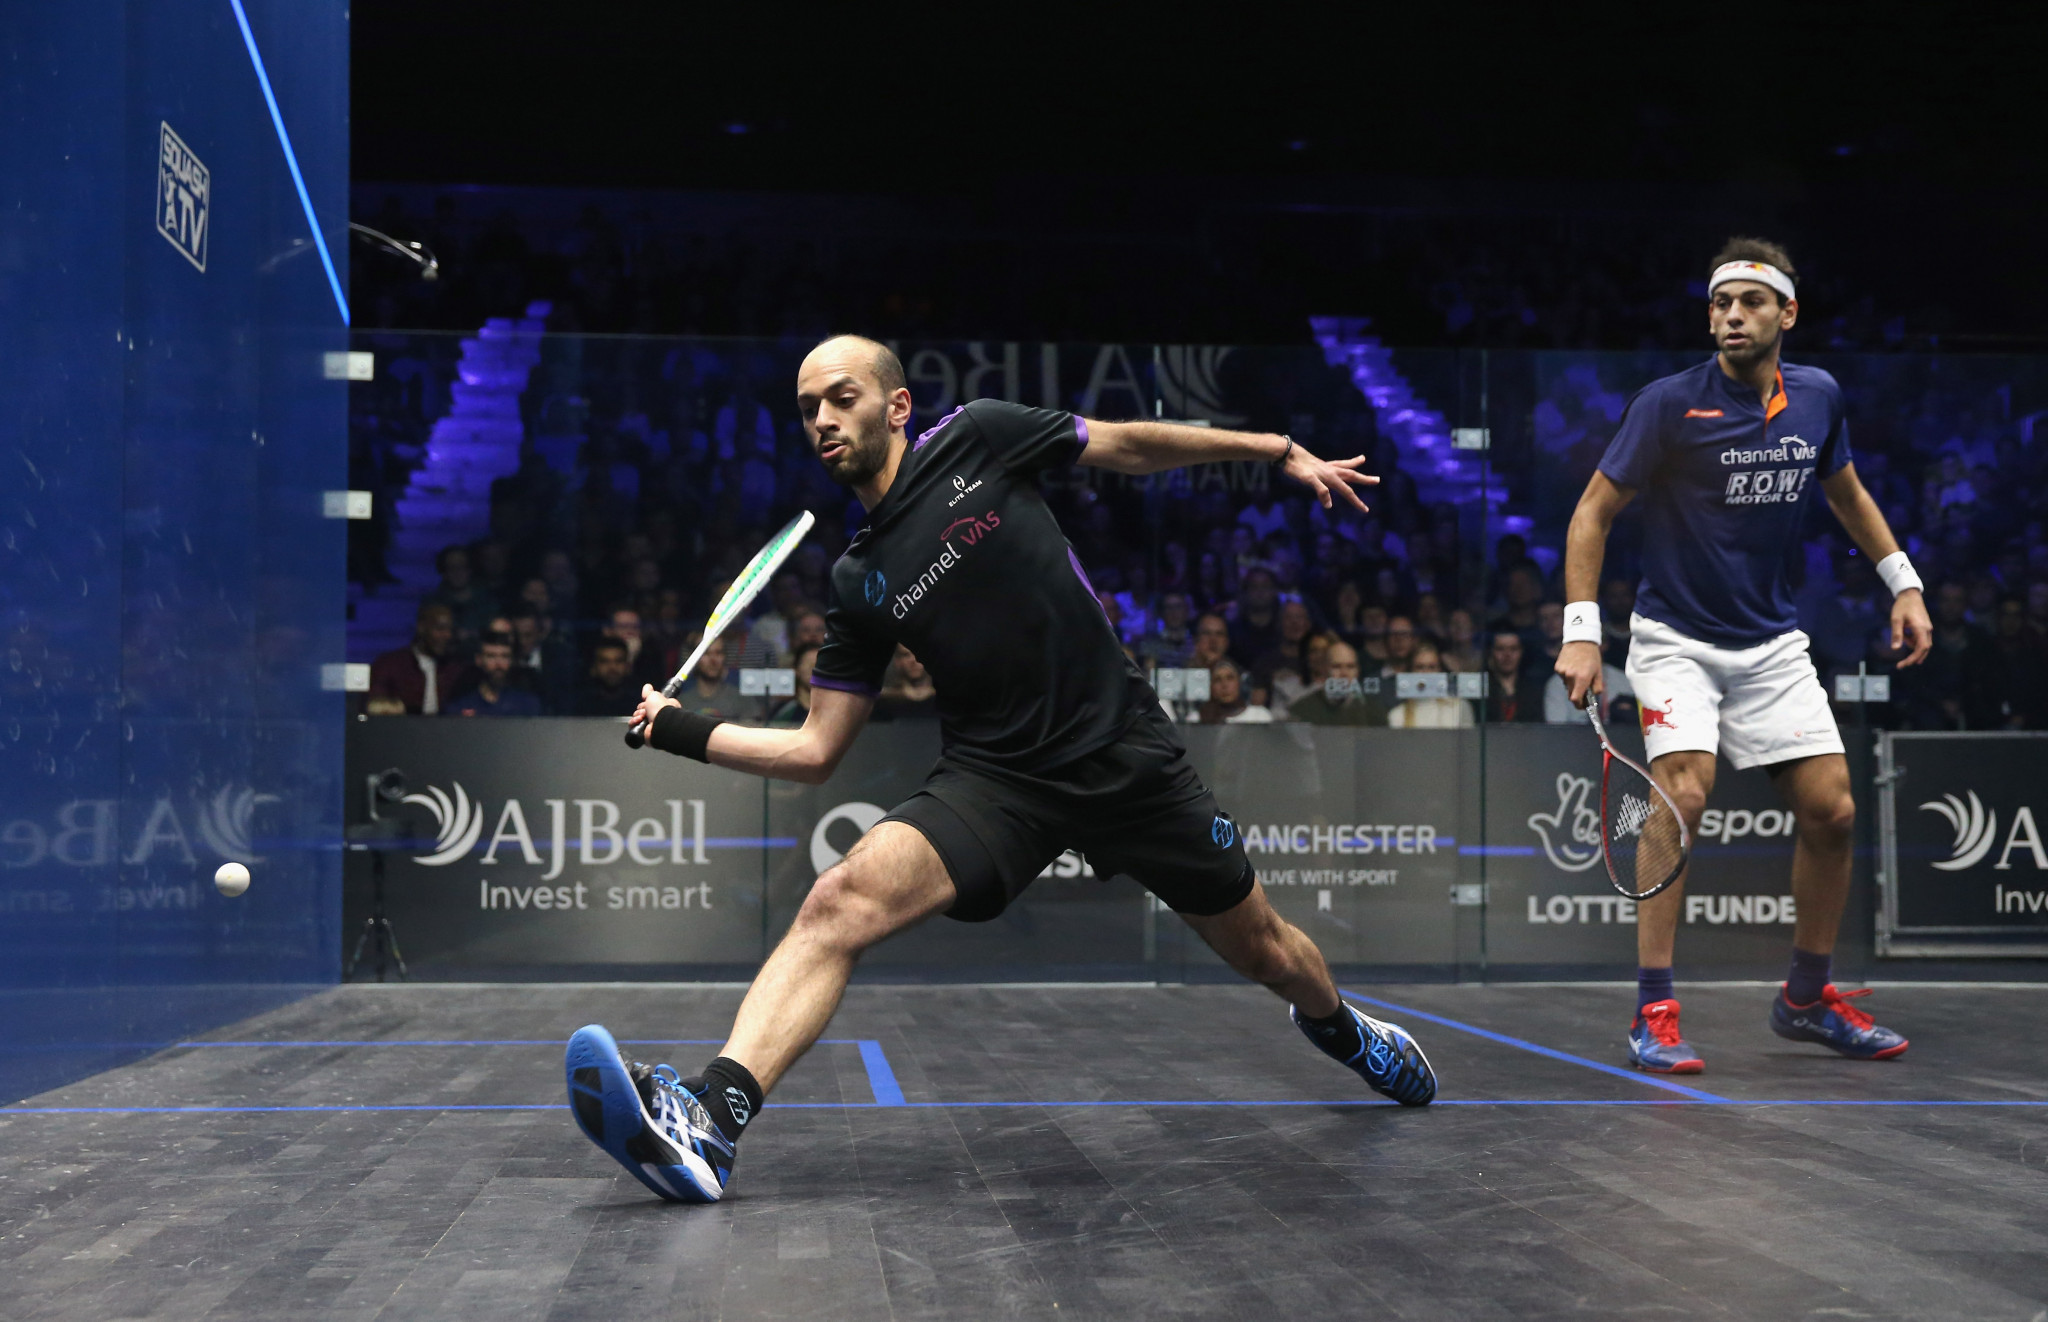 Egyptian squash player Marwan Elshorbagy has been cleared of breaching anti-doping rules ©Getty Images